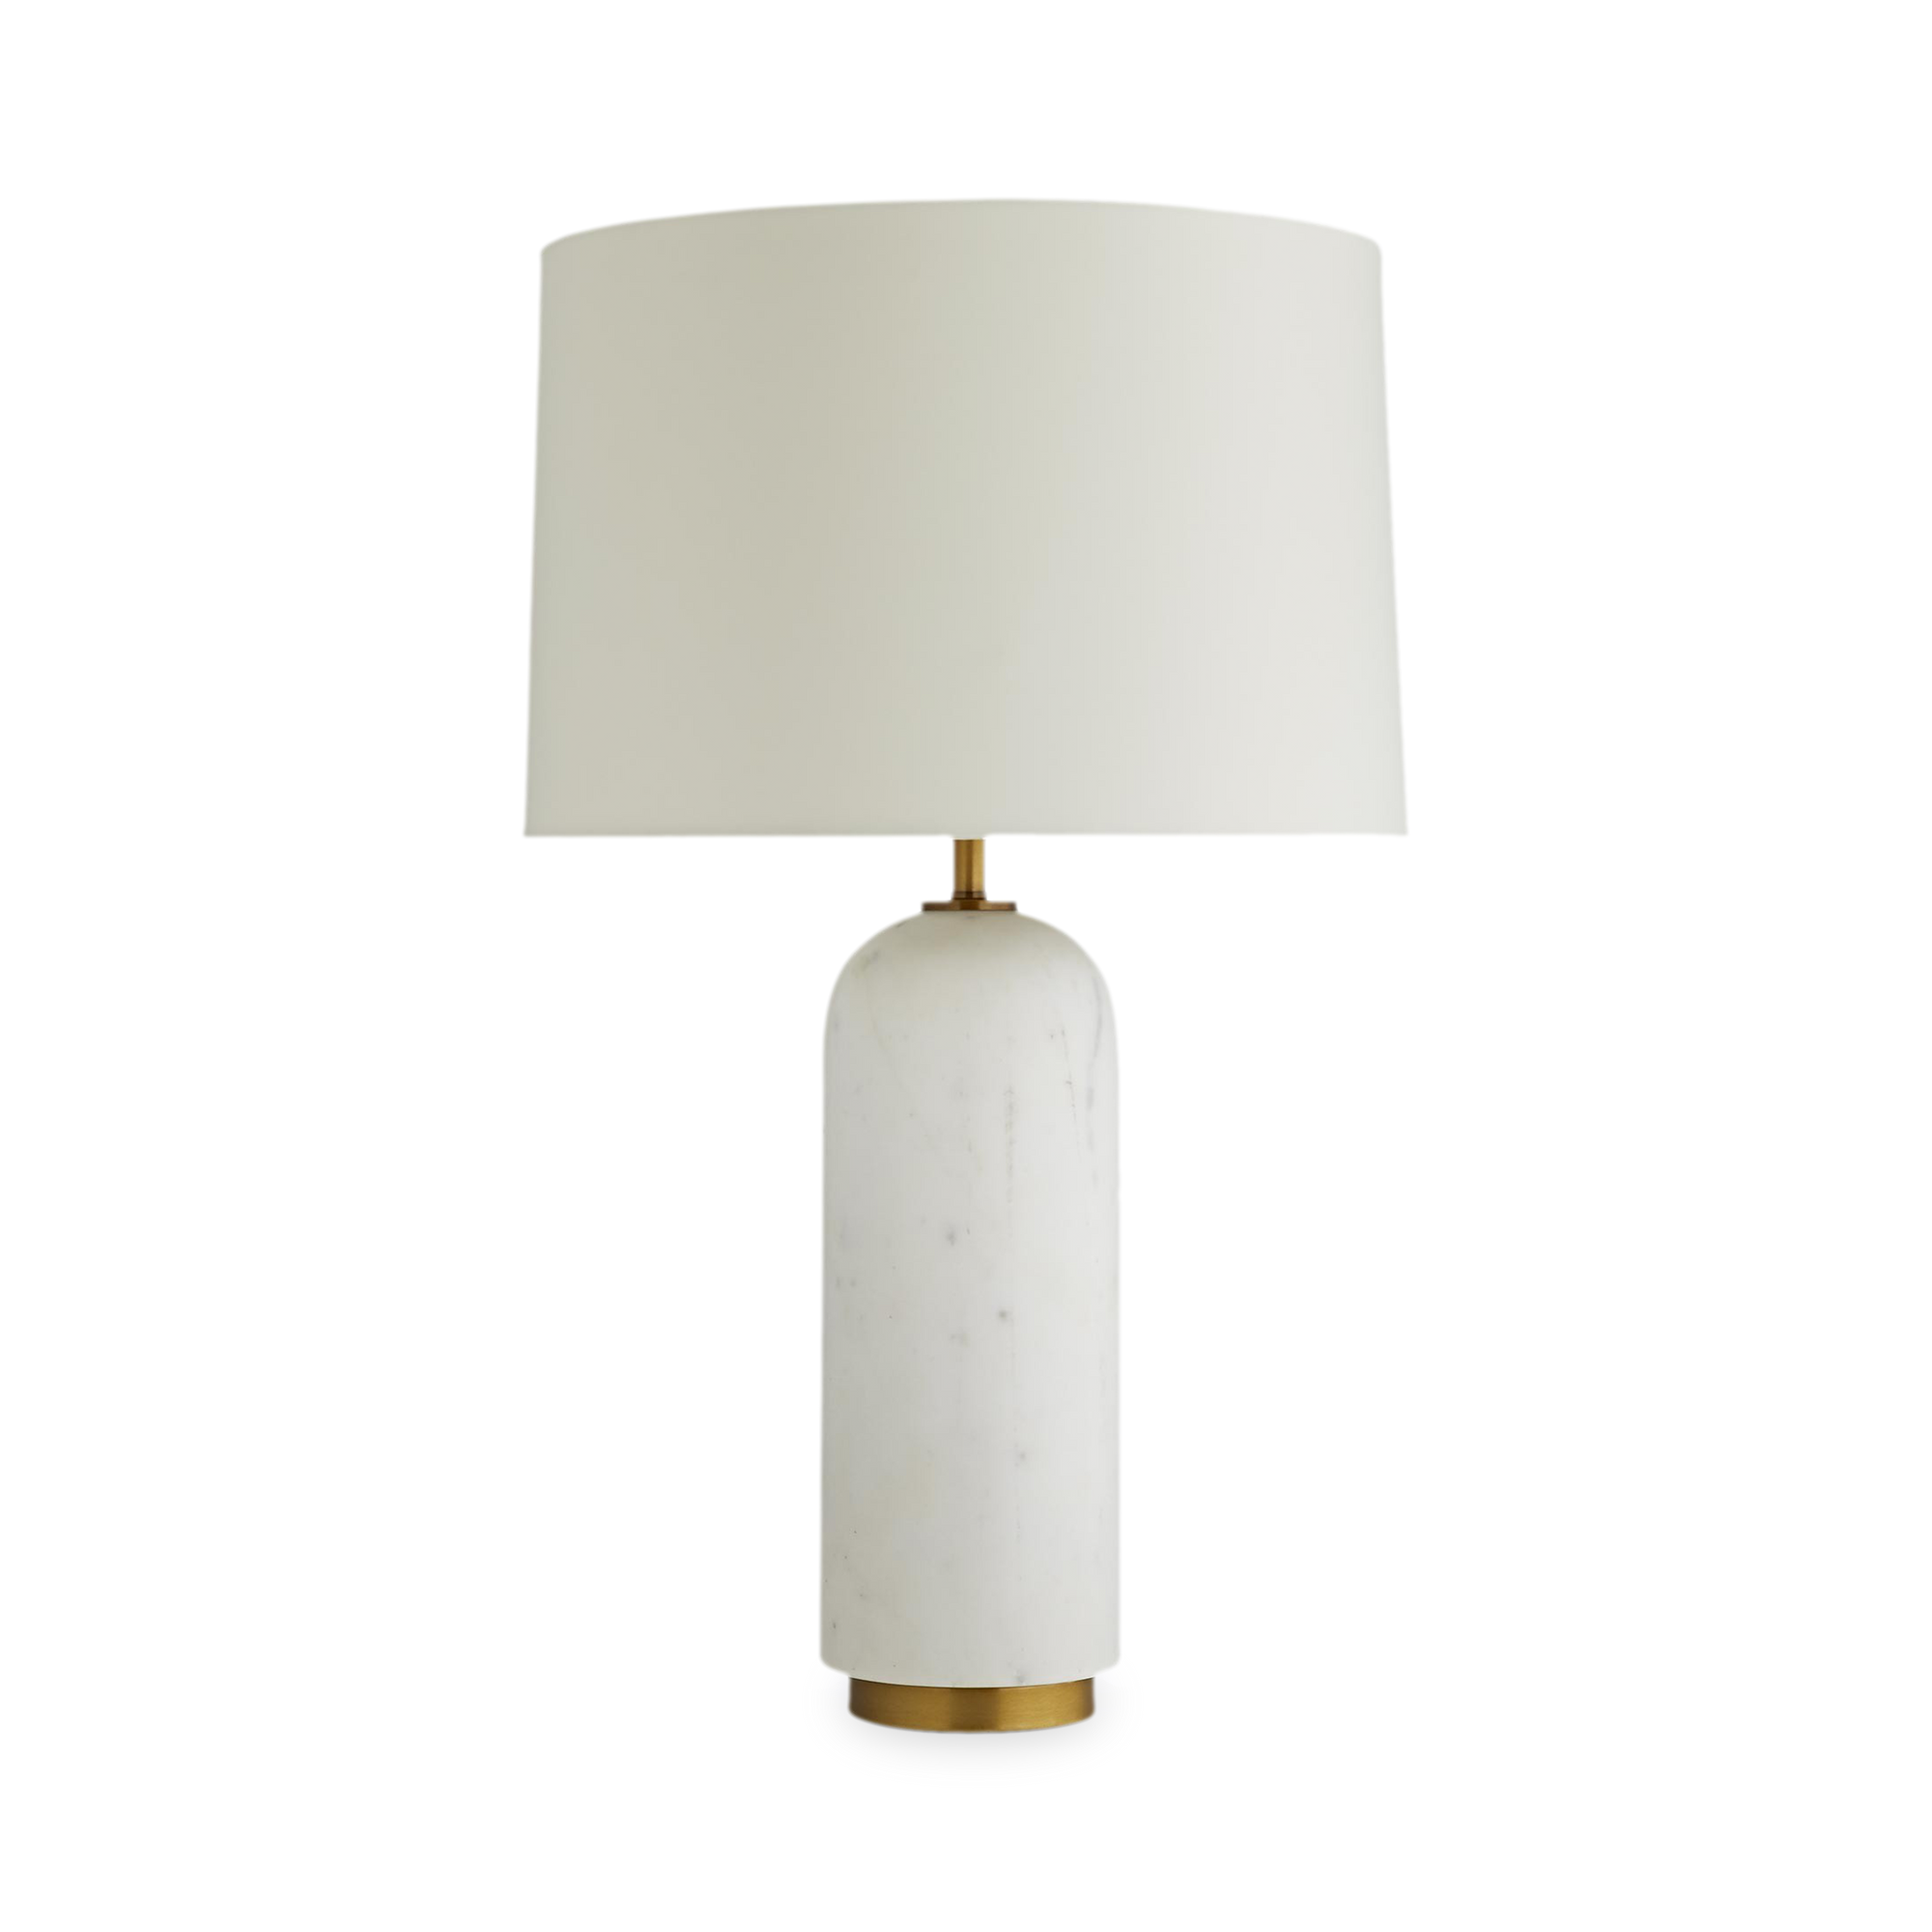 The classic shape of this lamp creates a timeless dynamic.